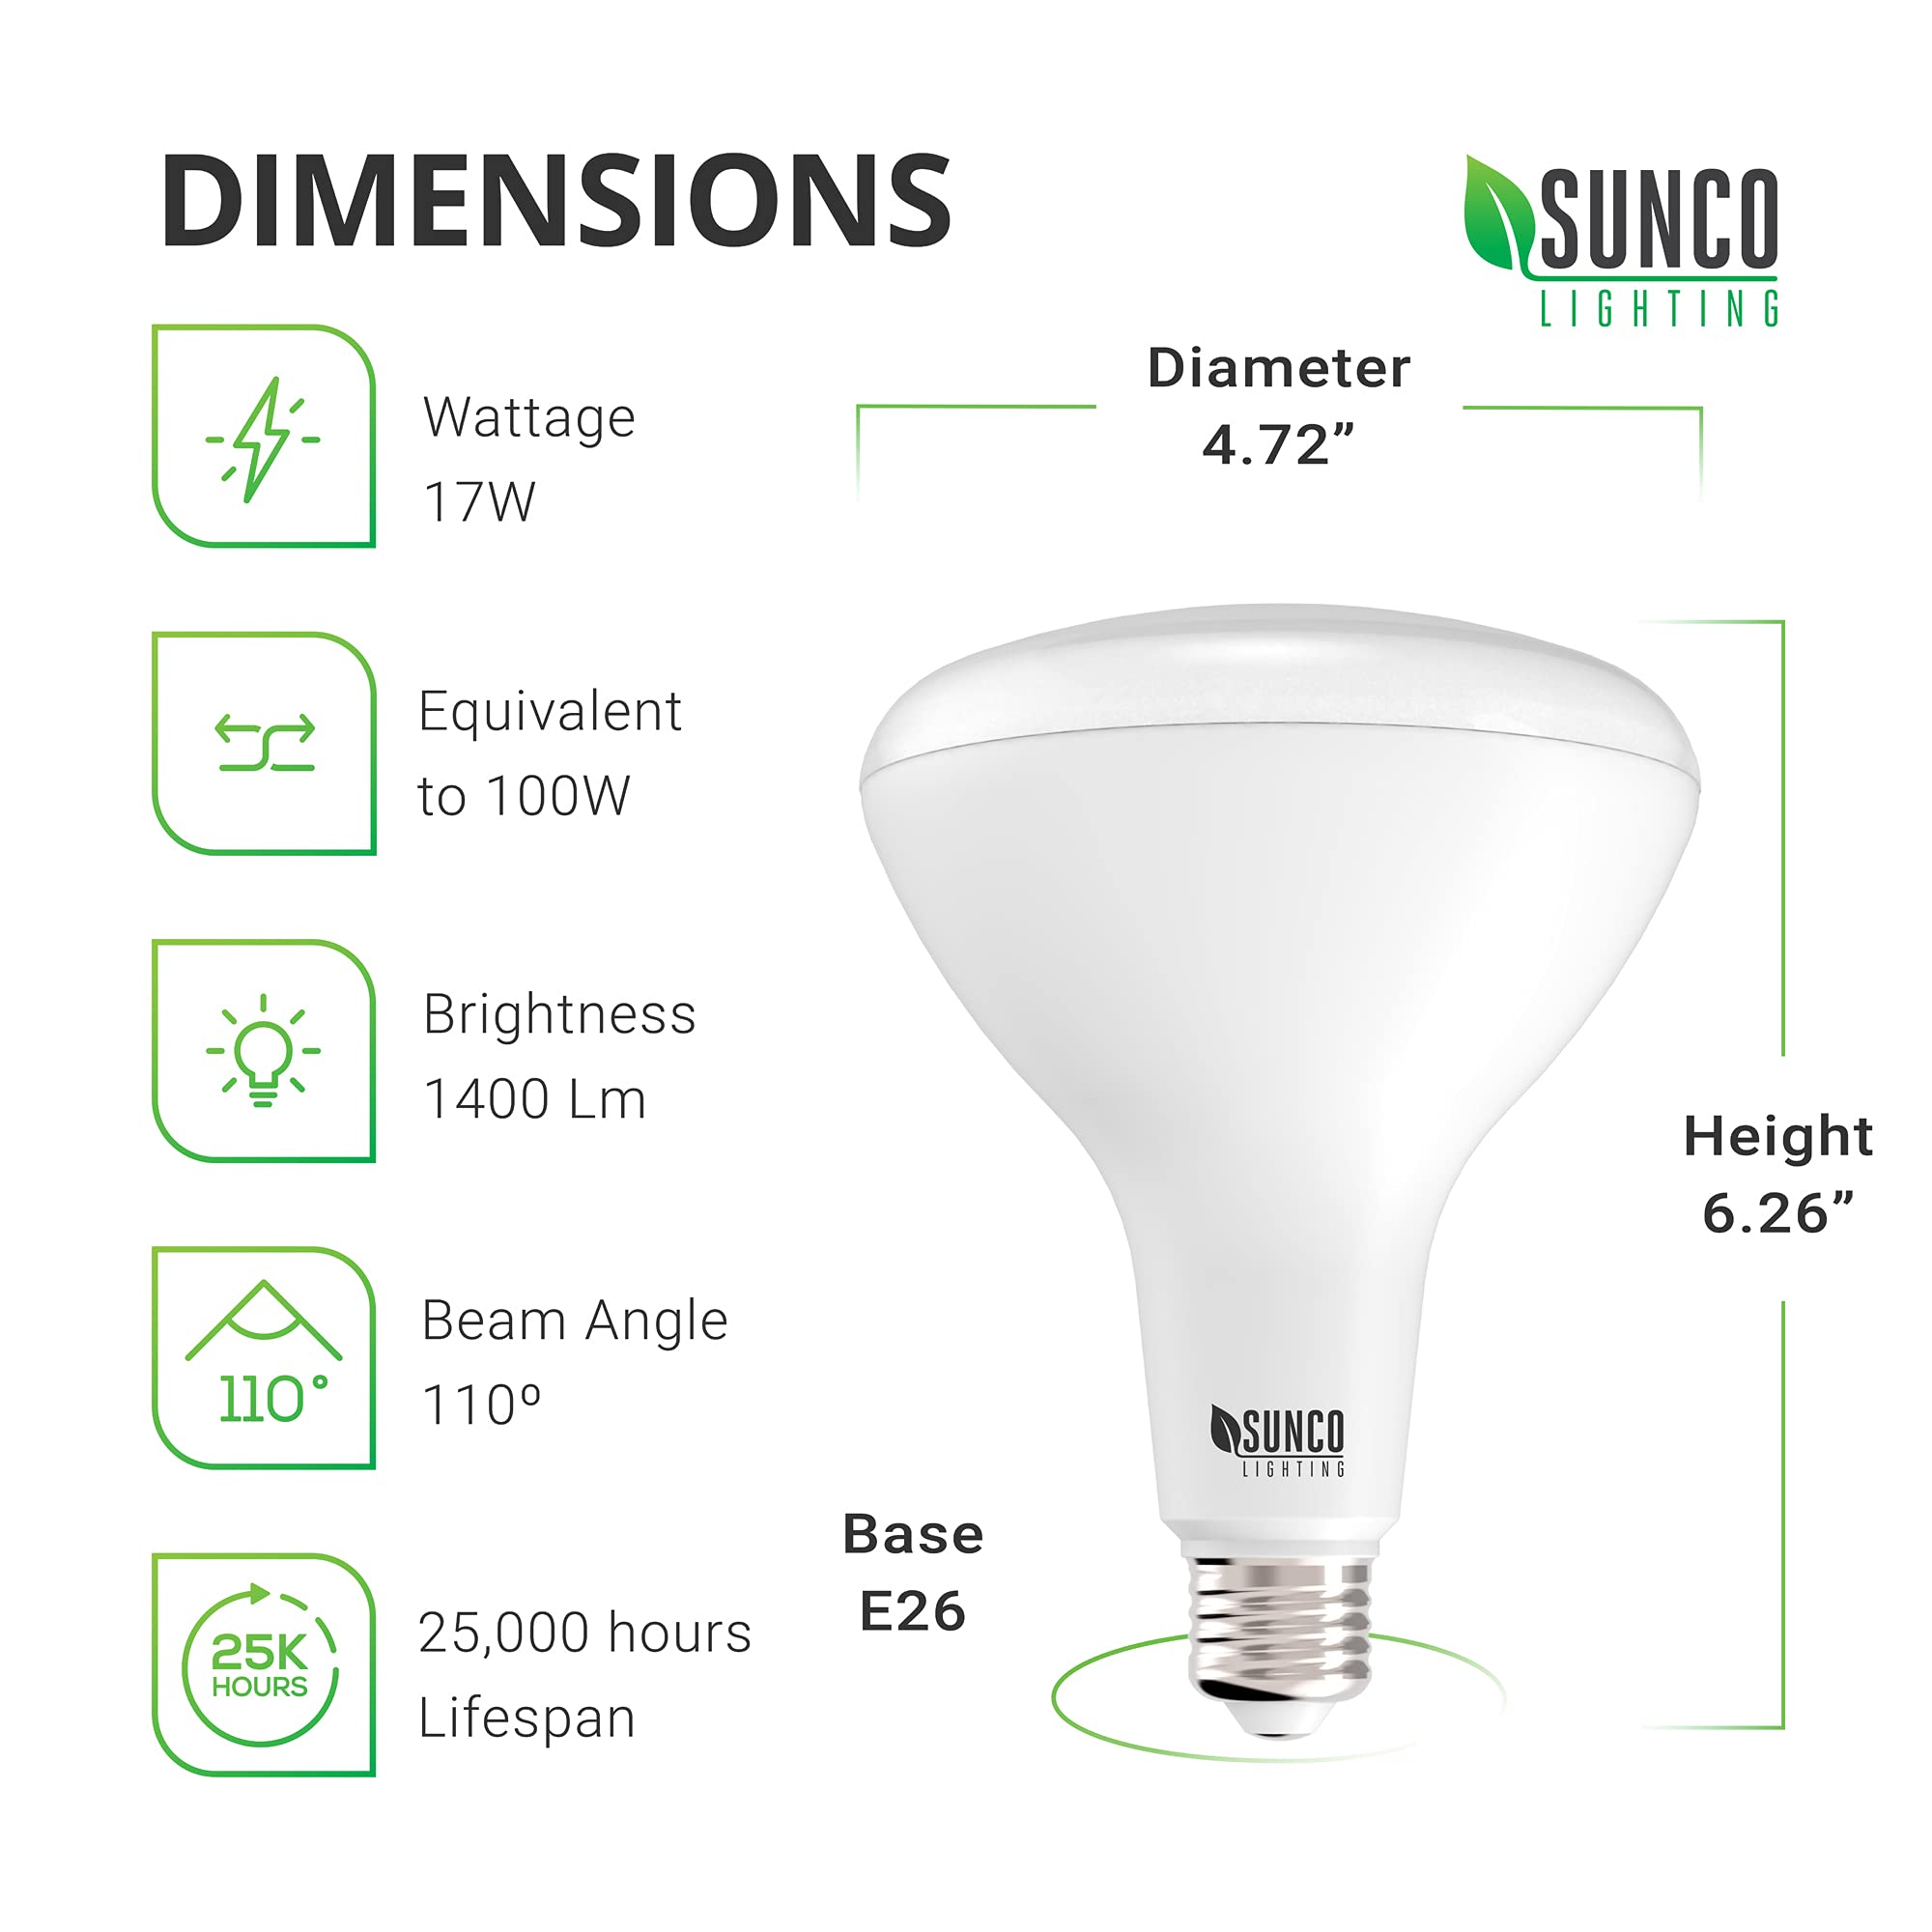 Sunco BR40 LED Light Bulbs, Indoor Flood Light, Dimmable, 5000K Daylight, 100W Equivalent 17W, 1400 LM, E26 Base, Recessed Can Light, High Lumen, Flicker-Free - UL & Energy Star 8 Pack